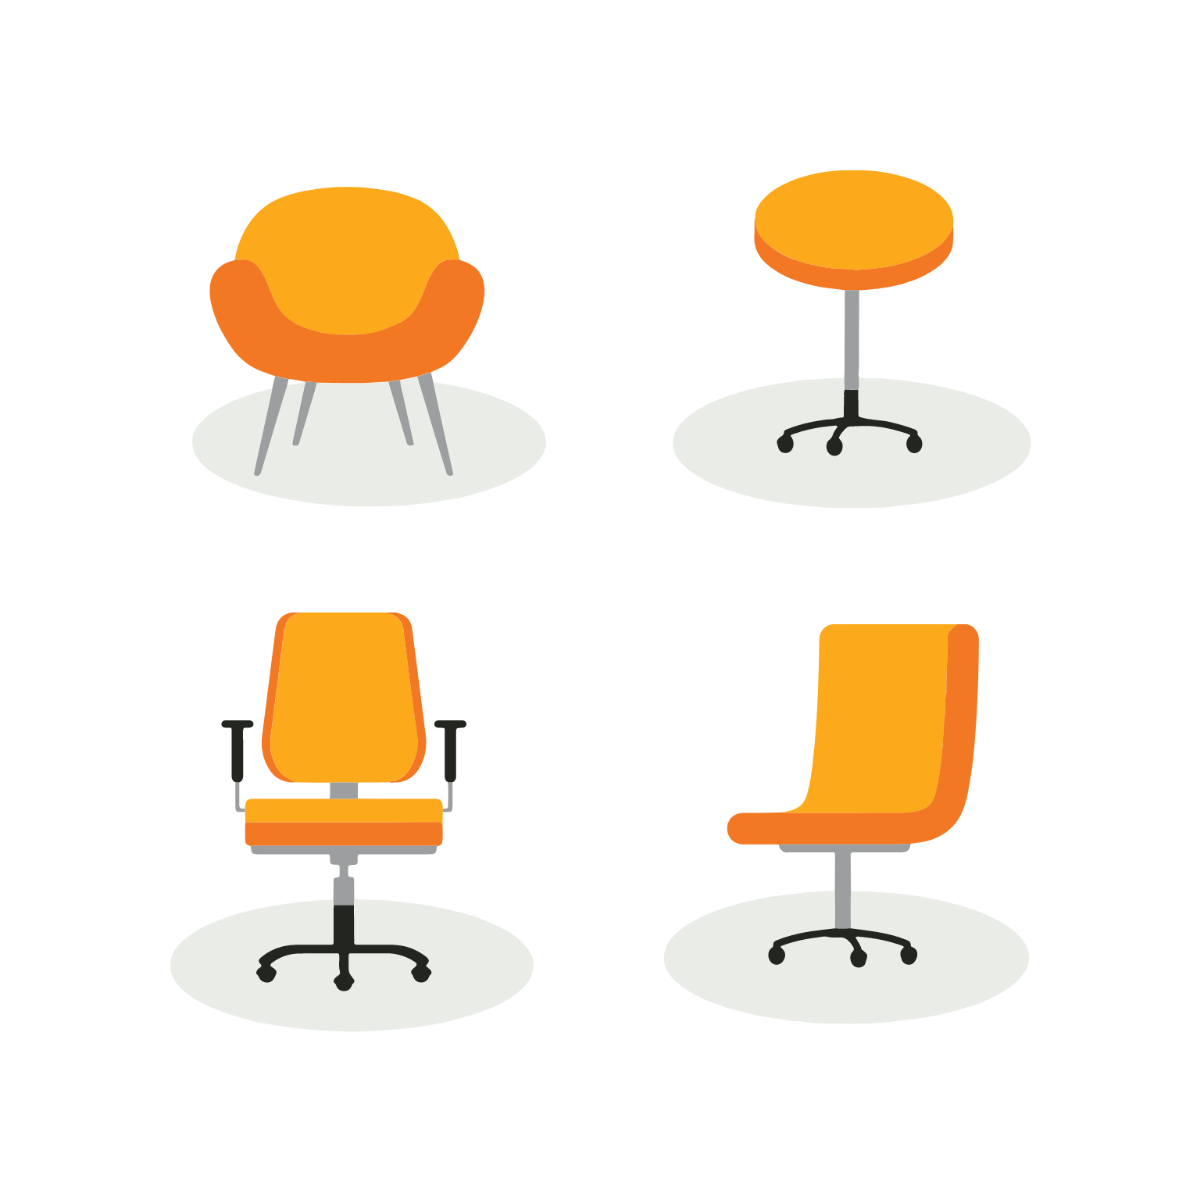 FREE Chair Templates & Examples - Edit Online & Download